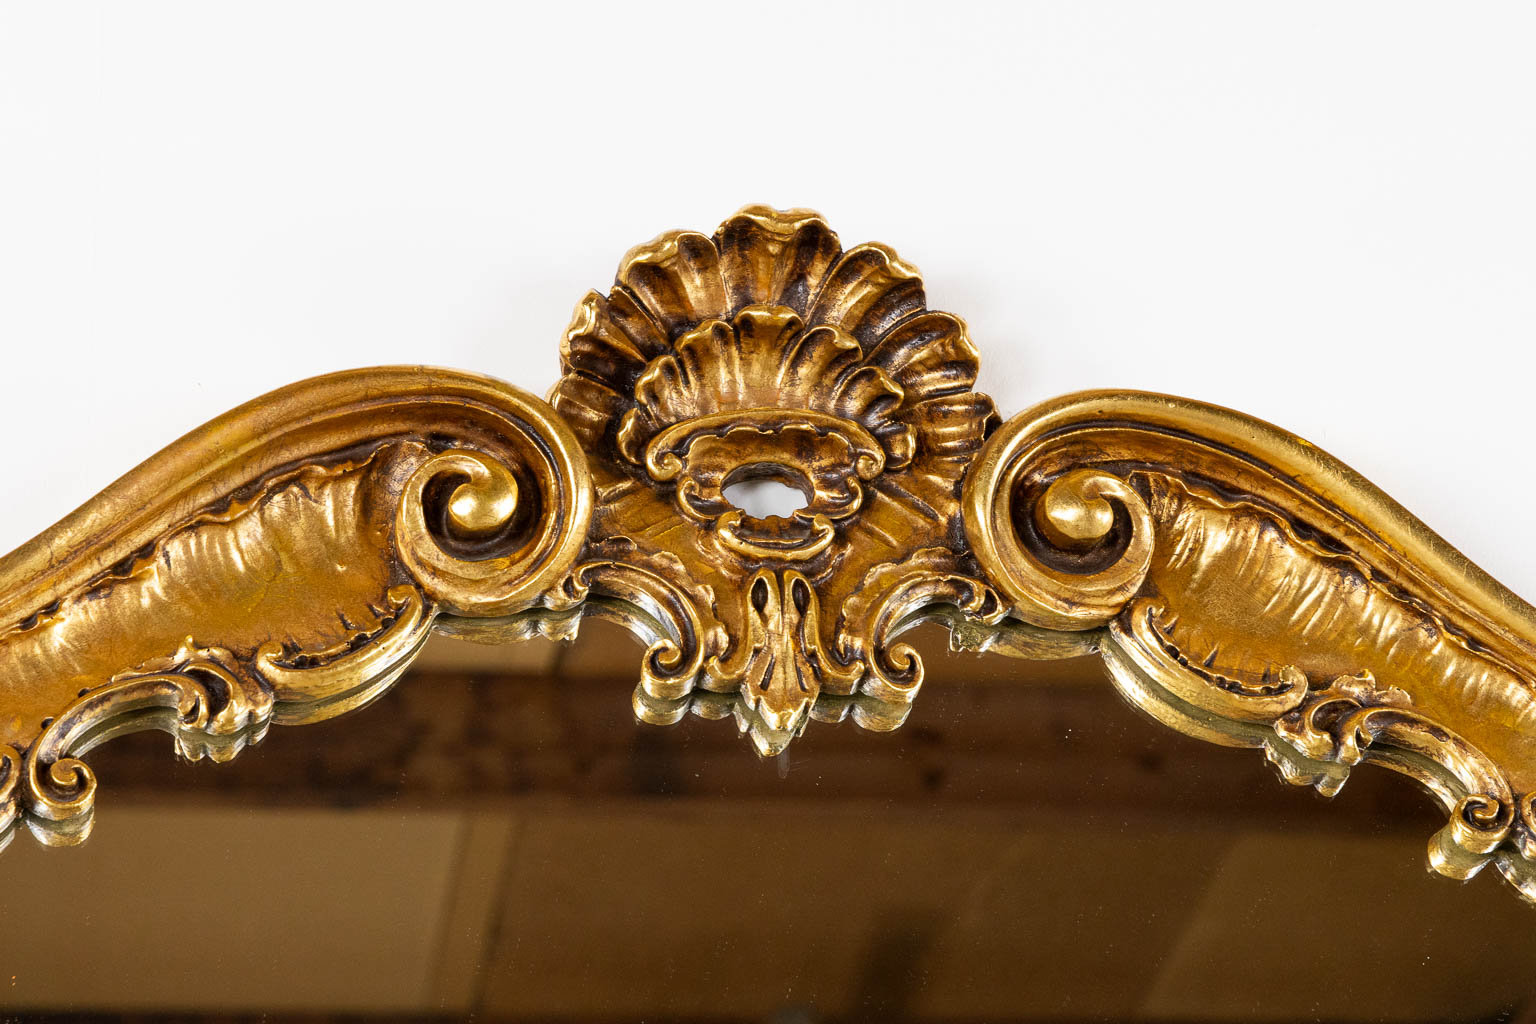 An Italian console table, mirror and wall lamps, gilt, Lodewijk XV stijl. (L:36 x W:131 x H:217 cm) - Image 5 of 13